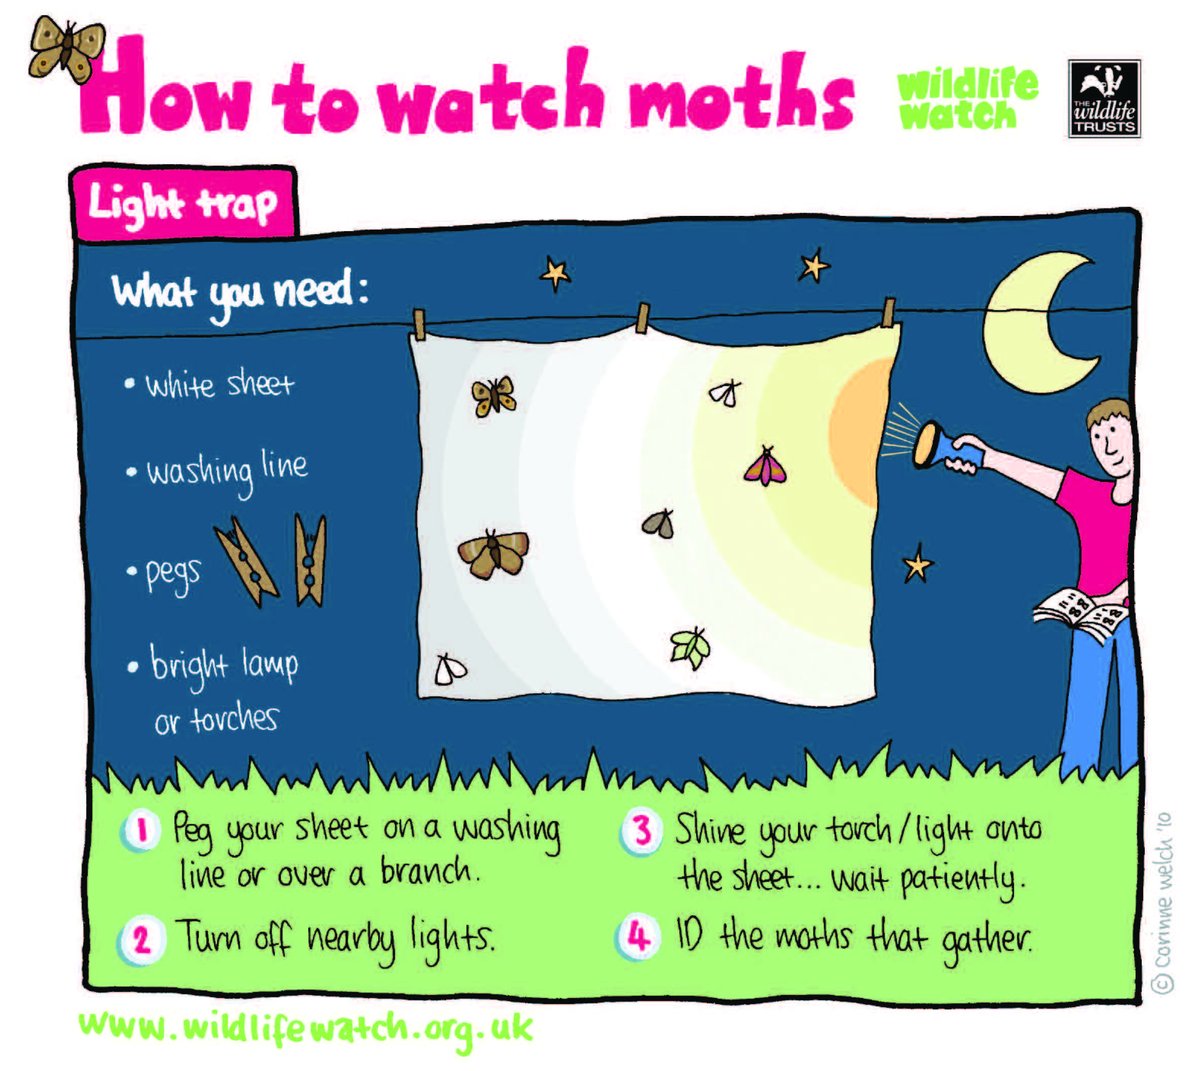 We have many fantastic species of moth here in the UK! Why not try setting up a moth ‘trap’ to see who visits your garden at night? This doesn’t hurt the moths, it simply involves attracting them to a light or food source so you can take a closer look 🔎 #NationalMothWeek